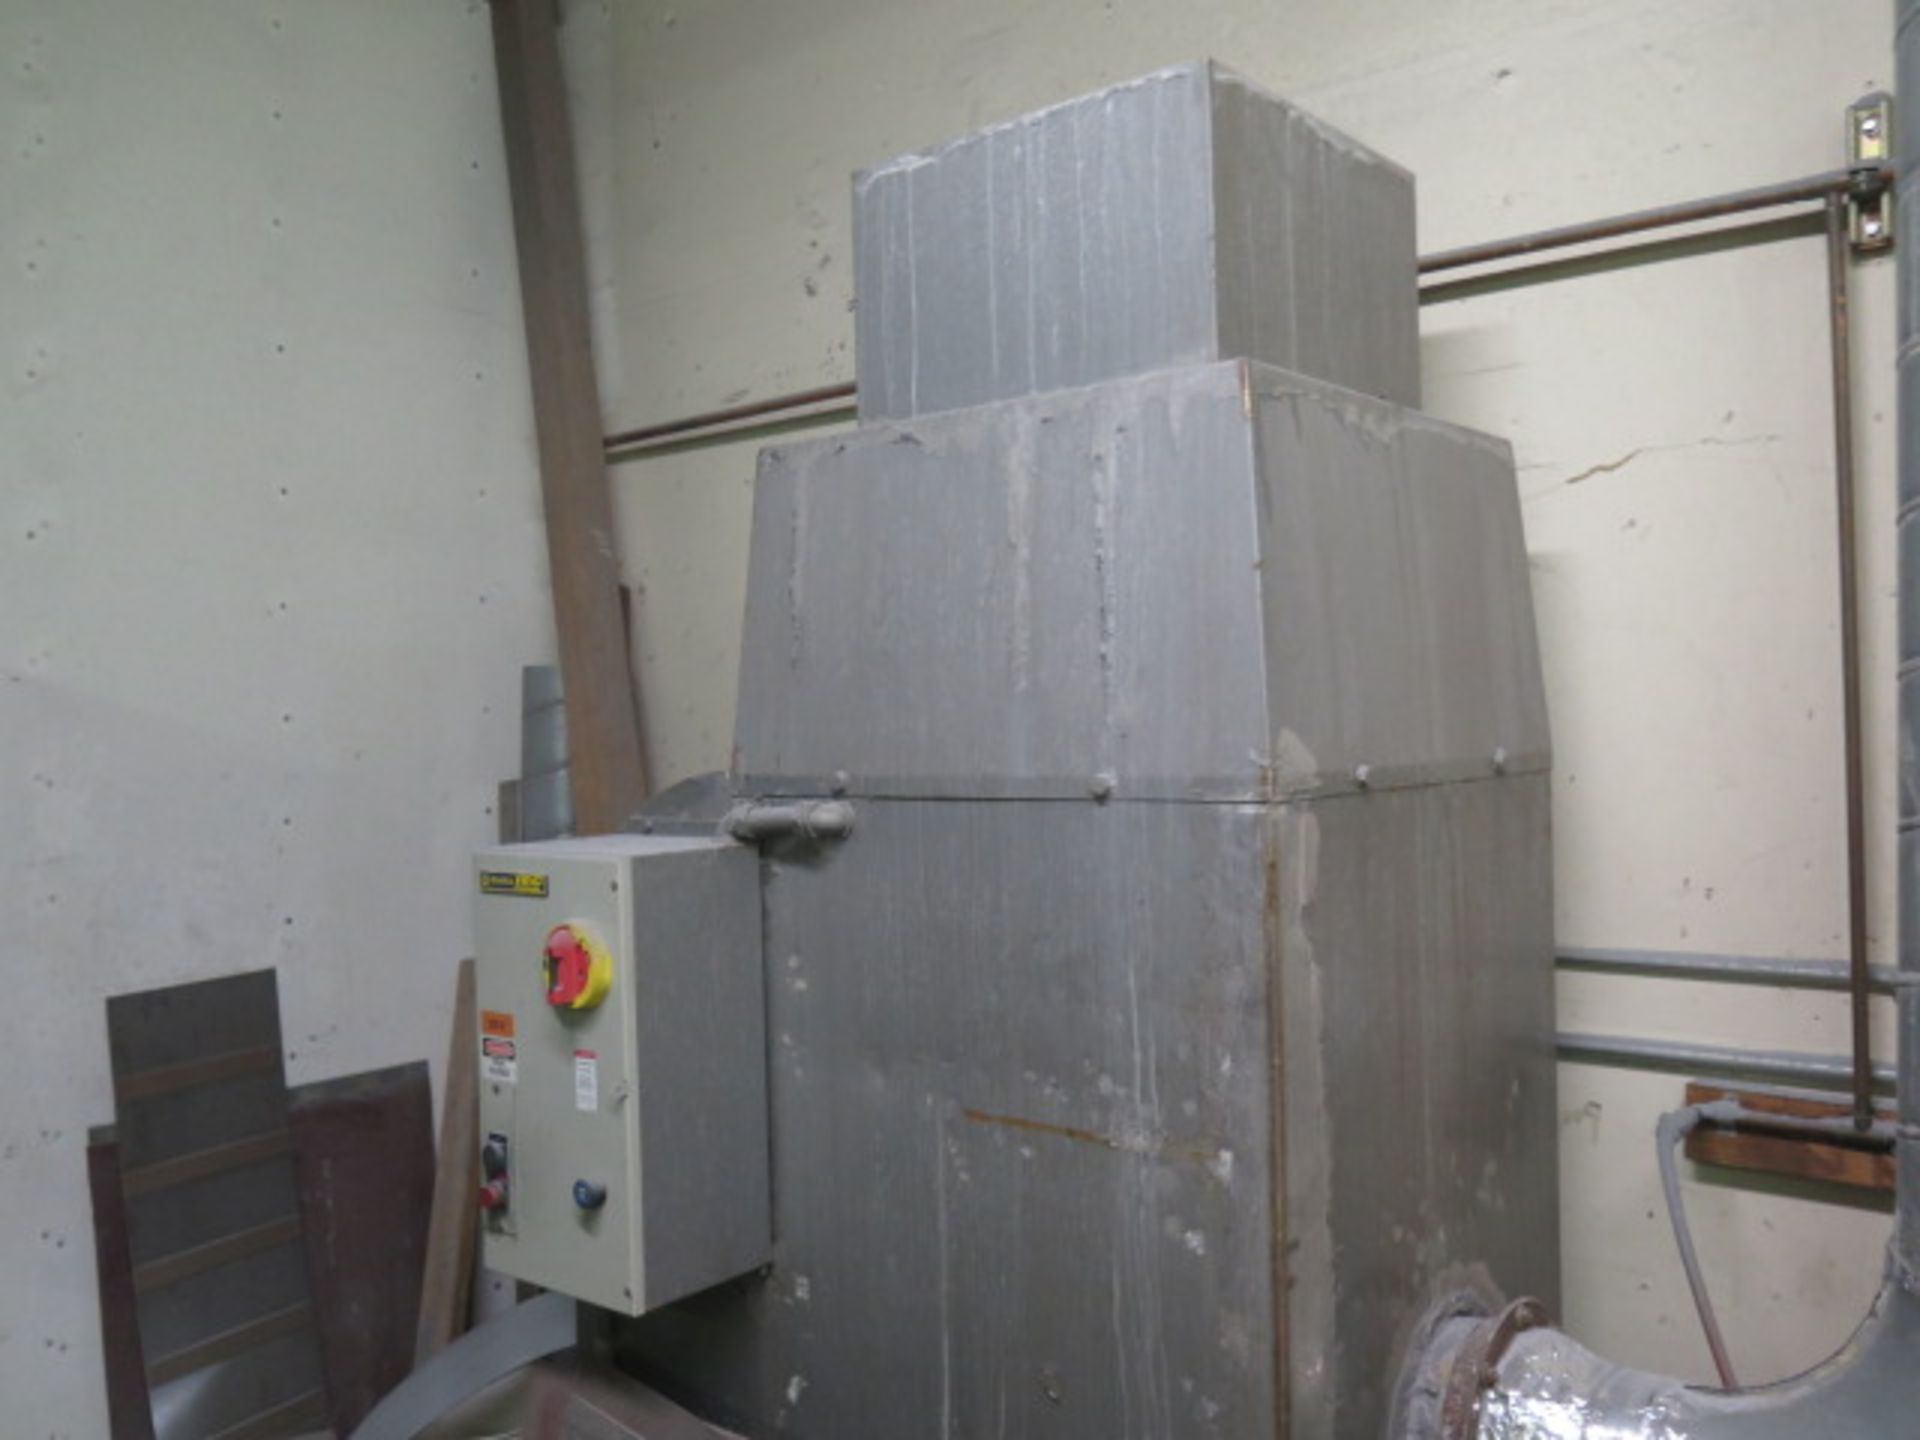 Cemco 1000 mdl. UR-1137SEMD 36" Belt Grainer s/n JR-1177-1 w/ Rand Bright dust collector, SOLD AS IS - Image 12 of 18